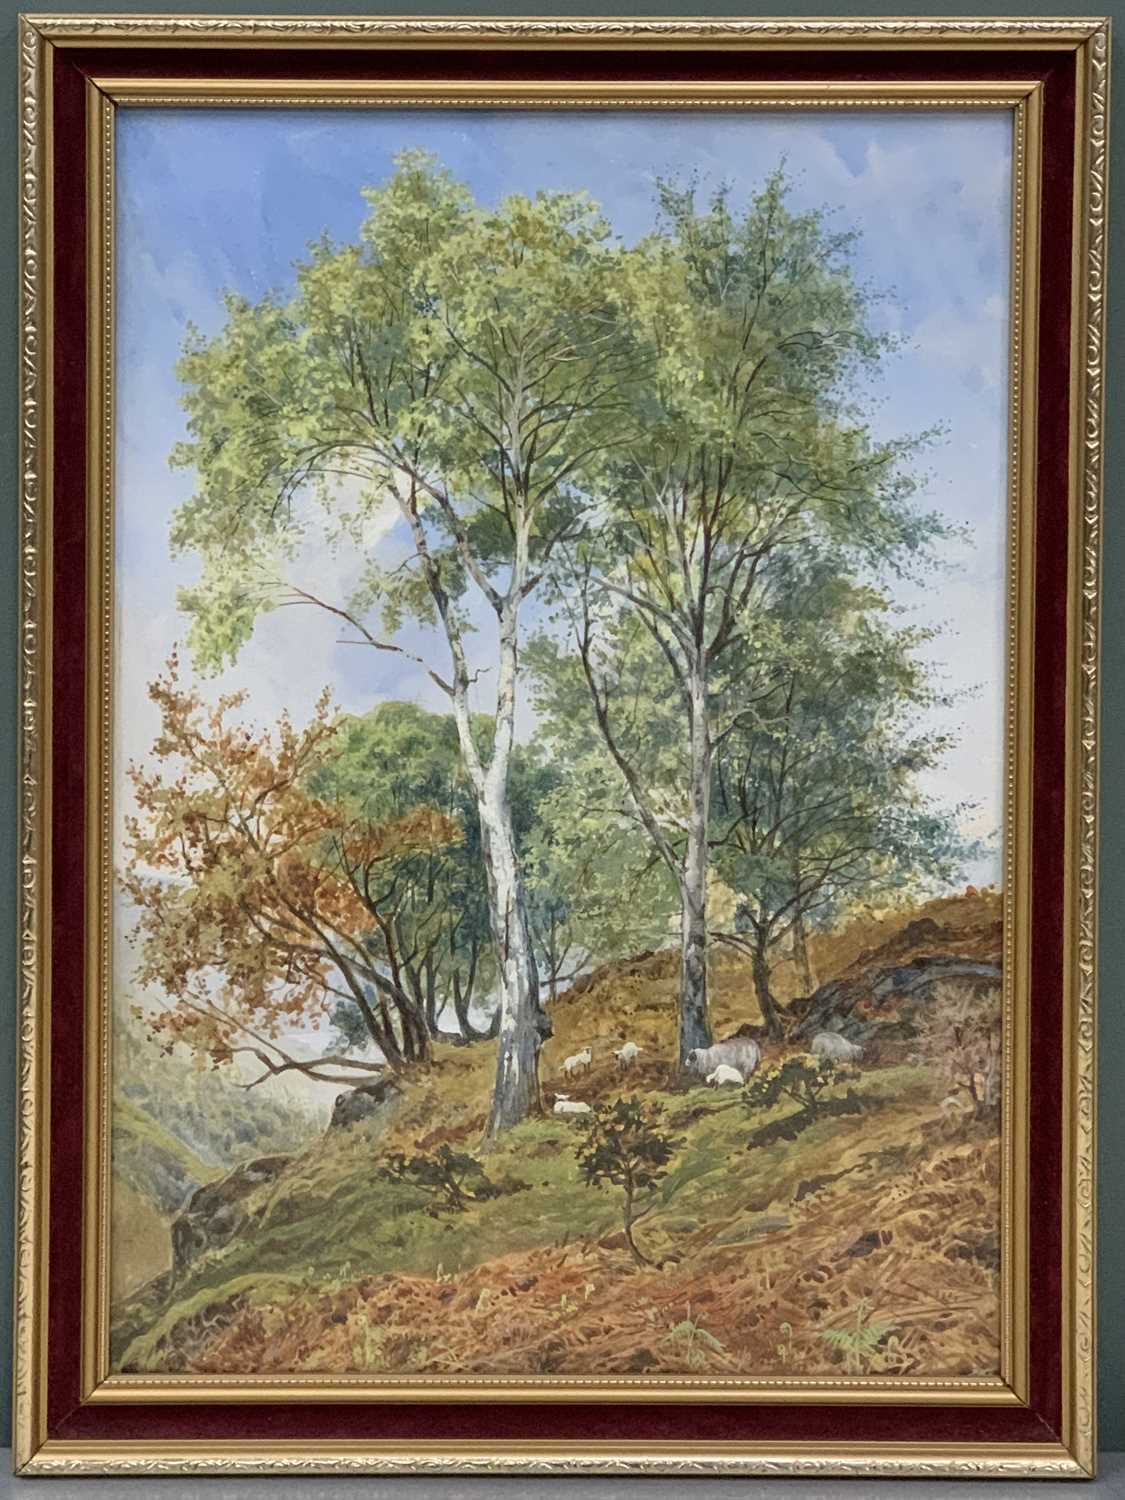 JOHN SINCLAIR (active 1871-1922) watercolour - sheep and lambs within a copse of trees, titled verso - Image 2 of 3